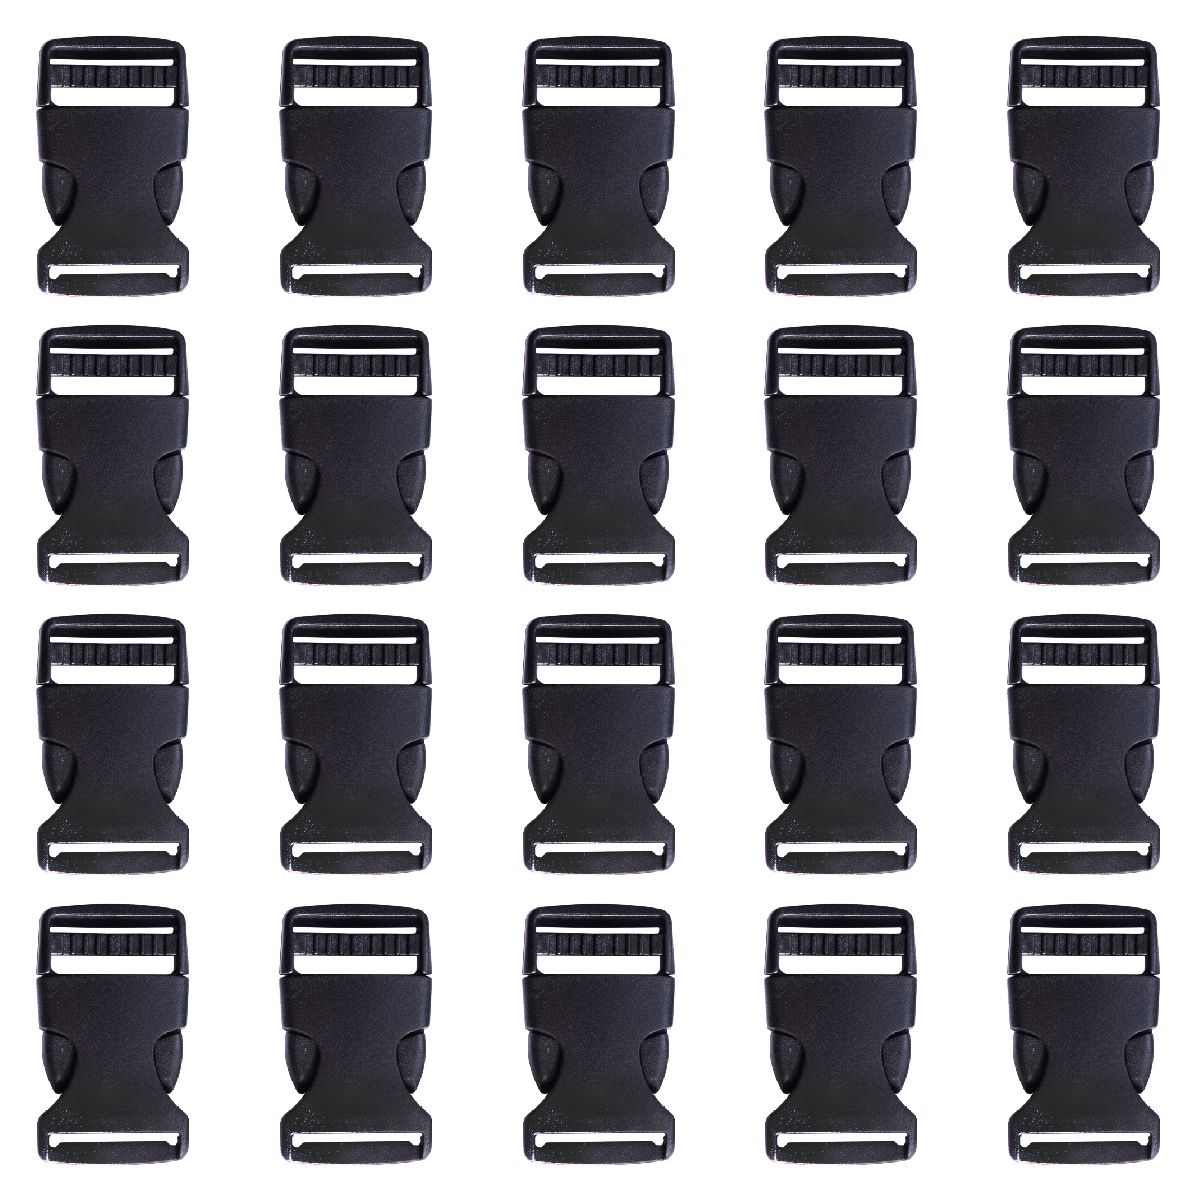 Accessories BZ Buckle Replacement 25 mm / 1 Inch Yosawo Set of 30 Black Plastic Quick Release Fasteners with Flat Side and Tri-Glide Sliders for Backpack Crafts DIY